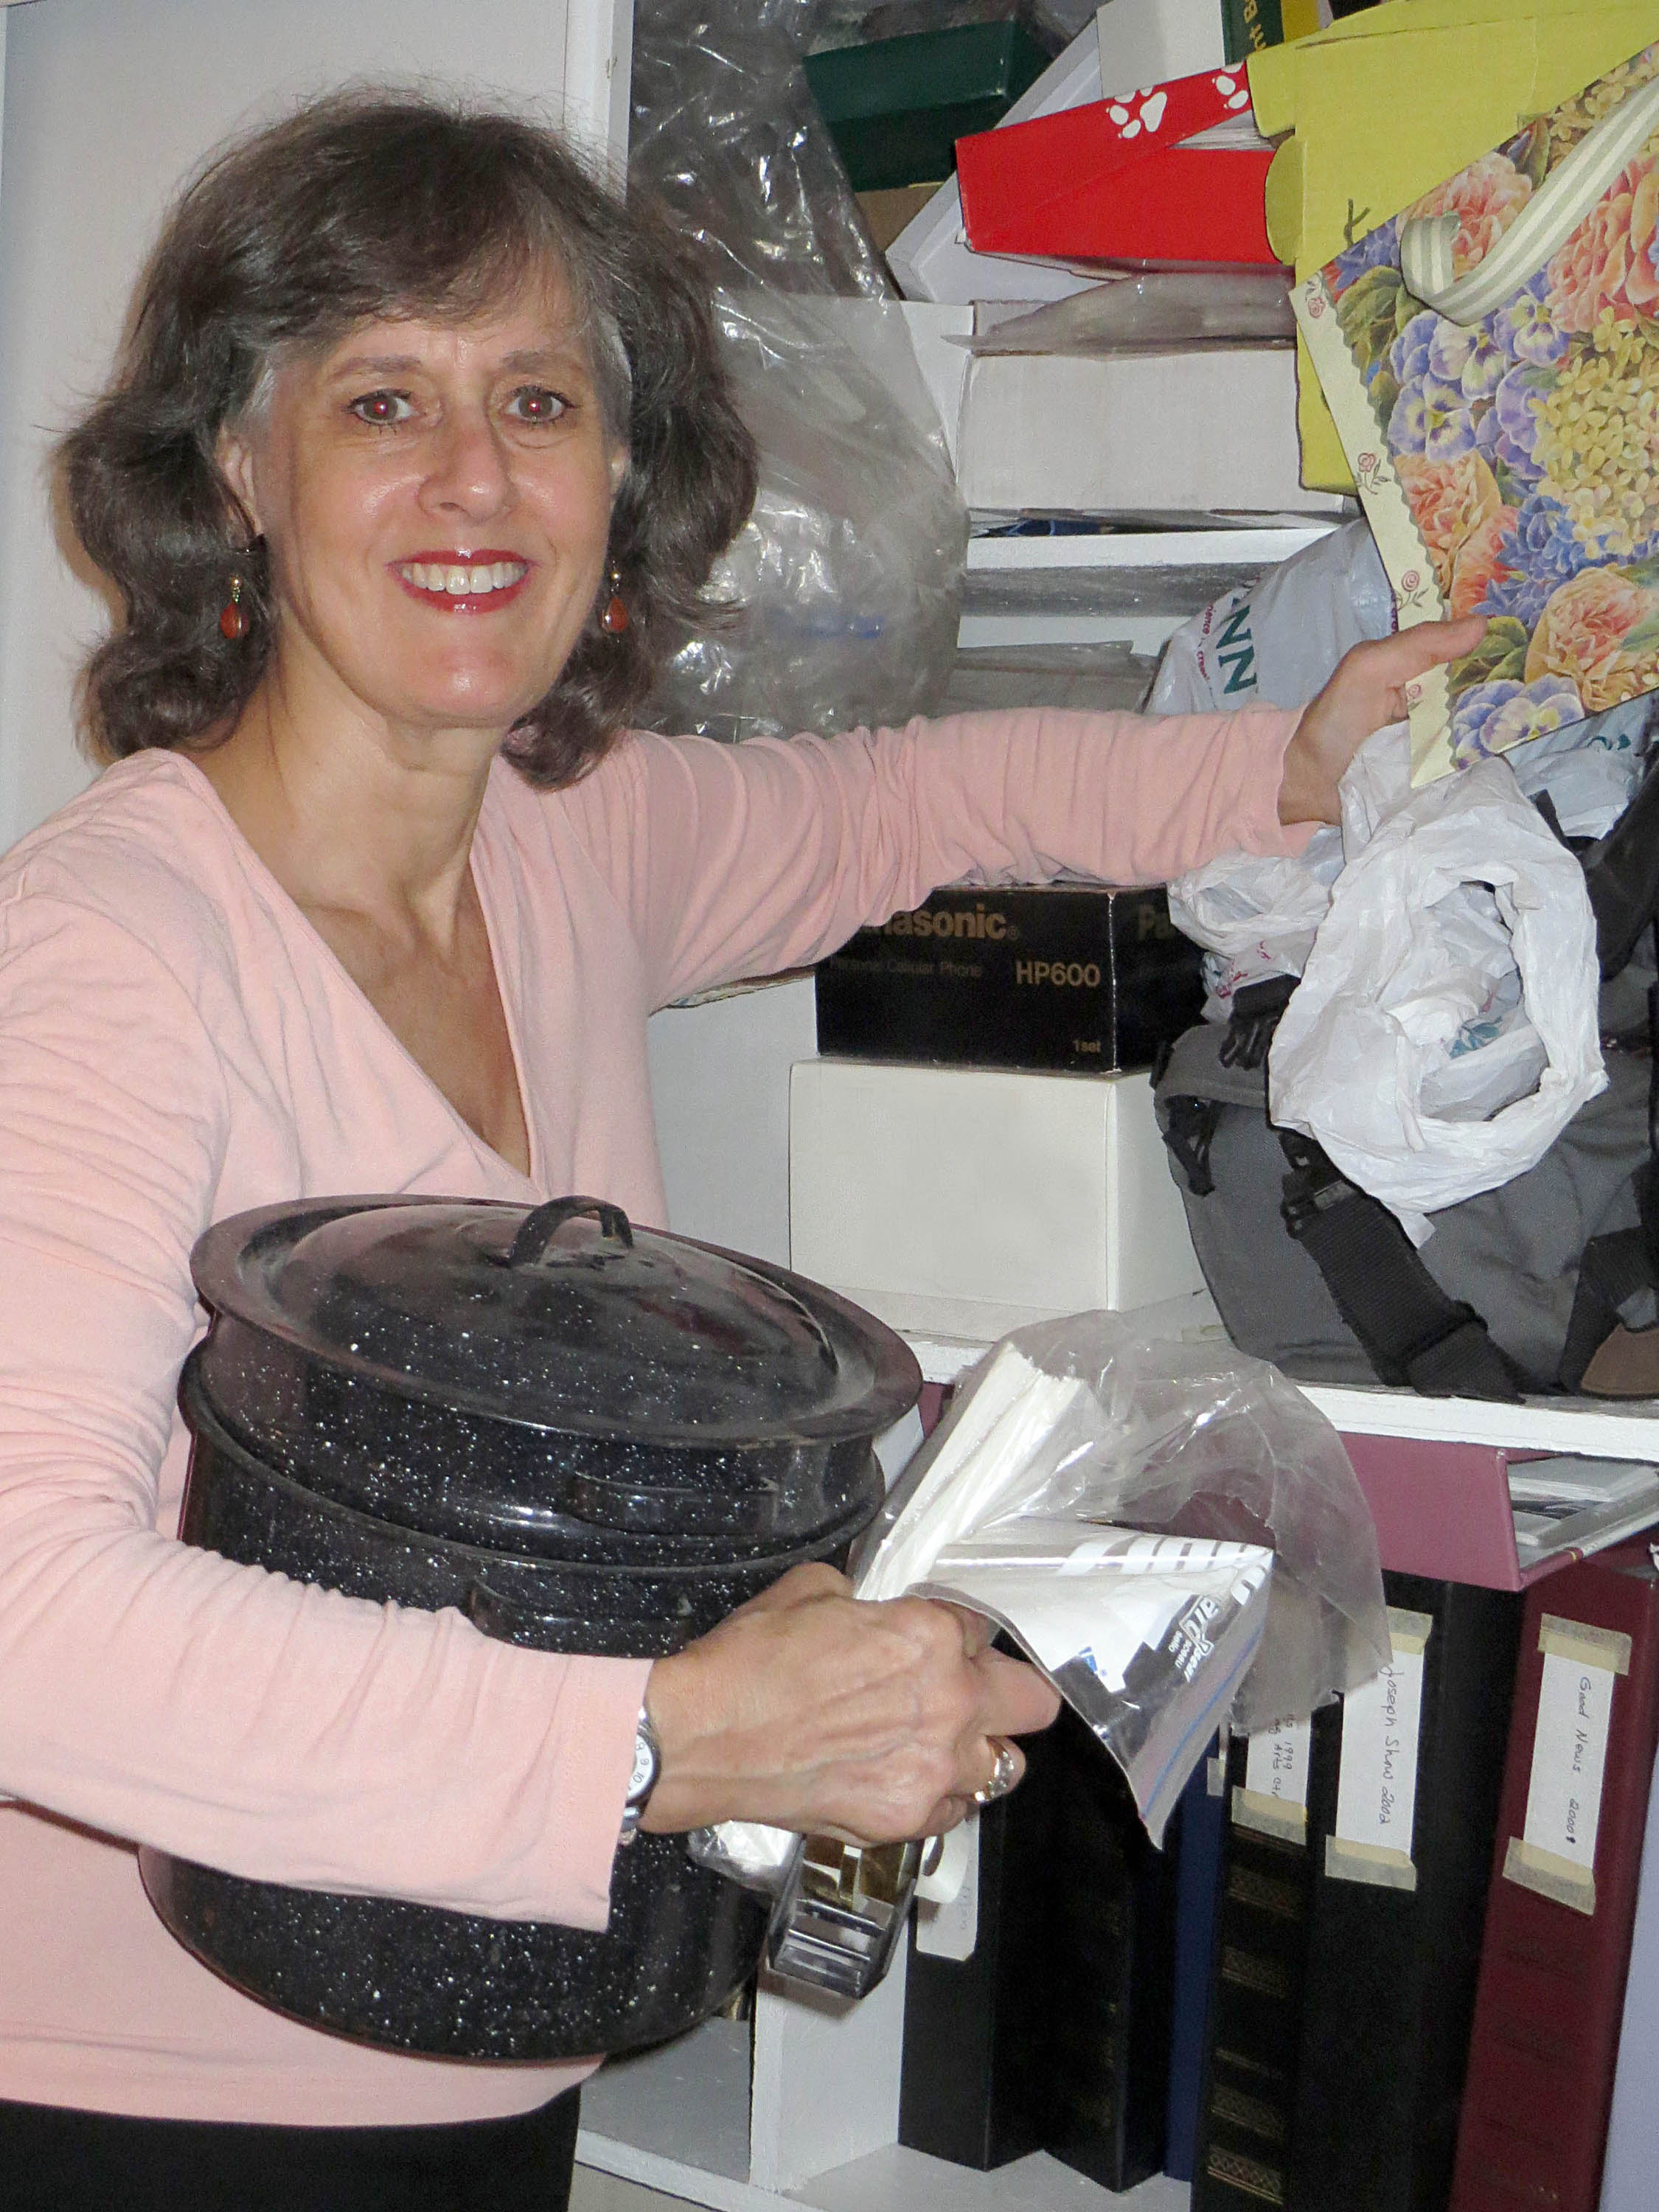 Hope Organizers, Inc. by Professional Organizer Janet Fishman, also known as the paper organizers, serves Los Angeles, Ventura, Santa Barbara, and Orange County, California. We offer paper management, daily money management, senior services, plus organizing and clutter management!